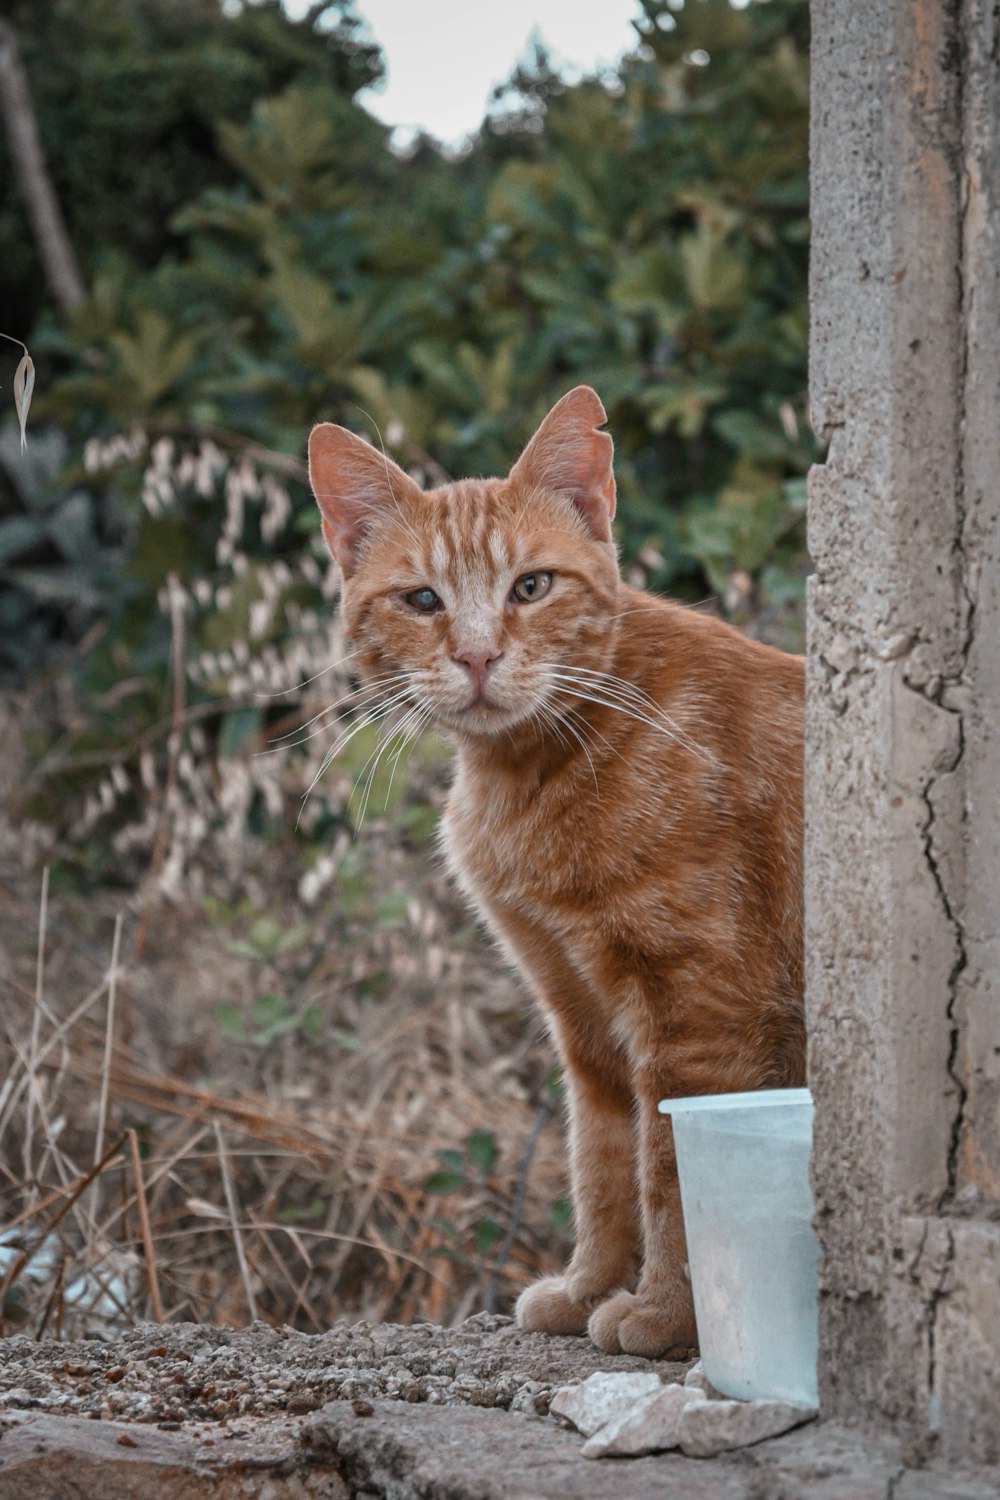 an orange cat standing next to a cup